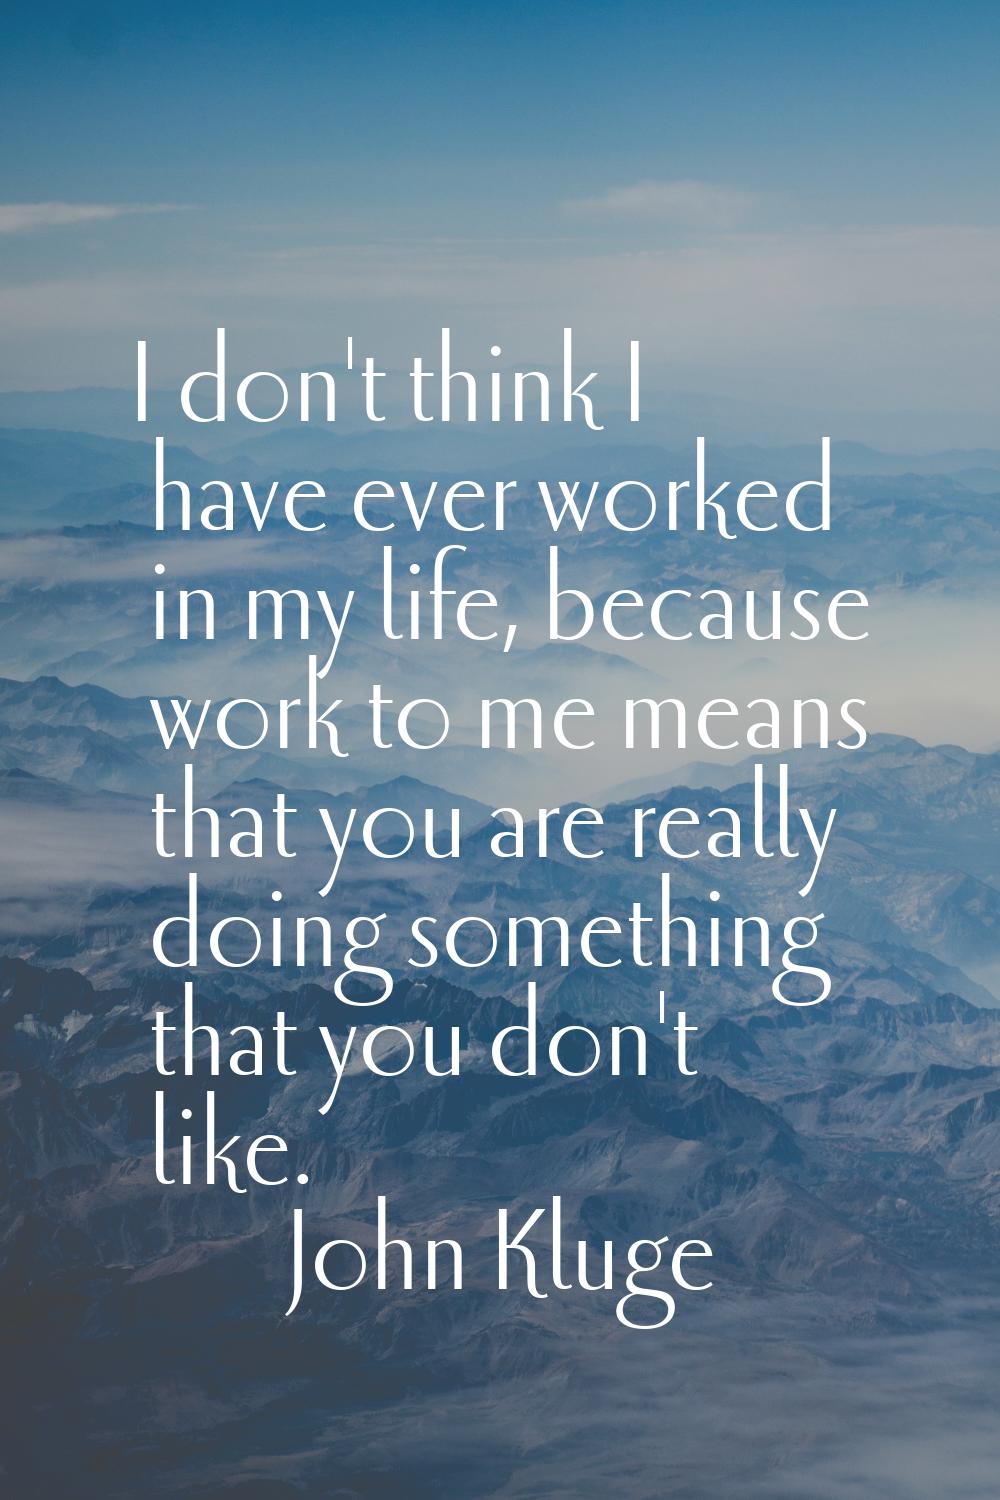 I don't think I have ever worked in my life, because work to me means that you are really doing som